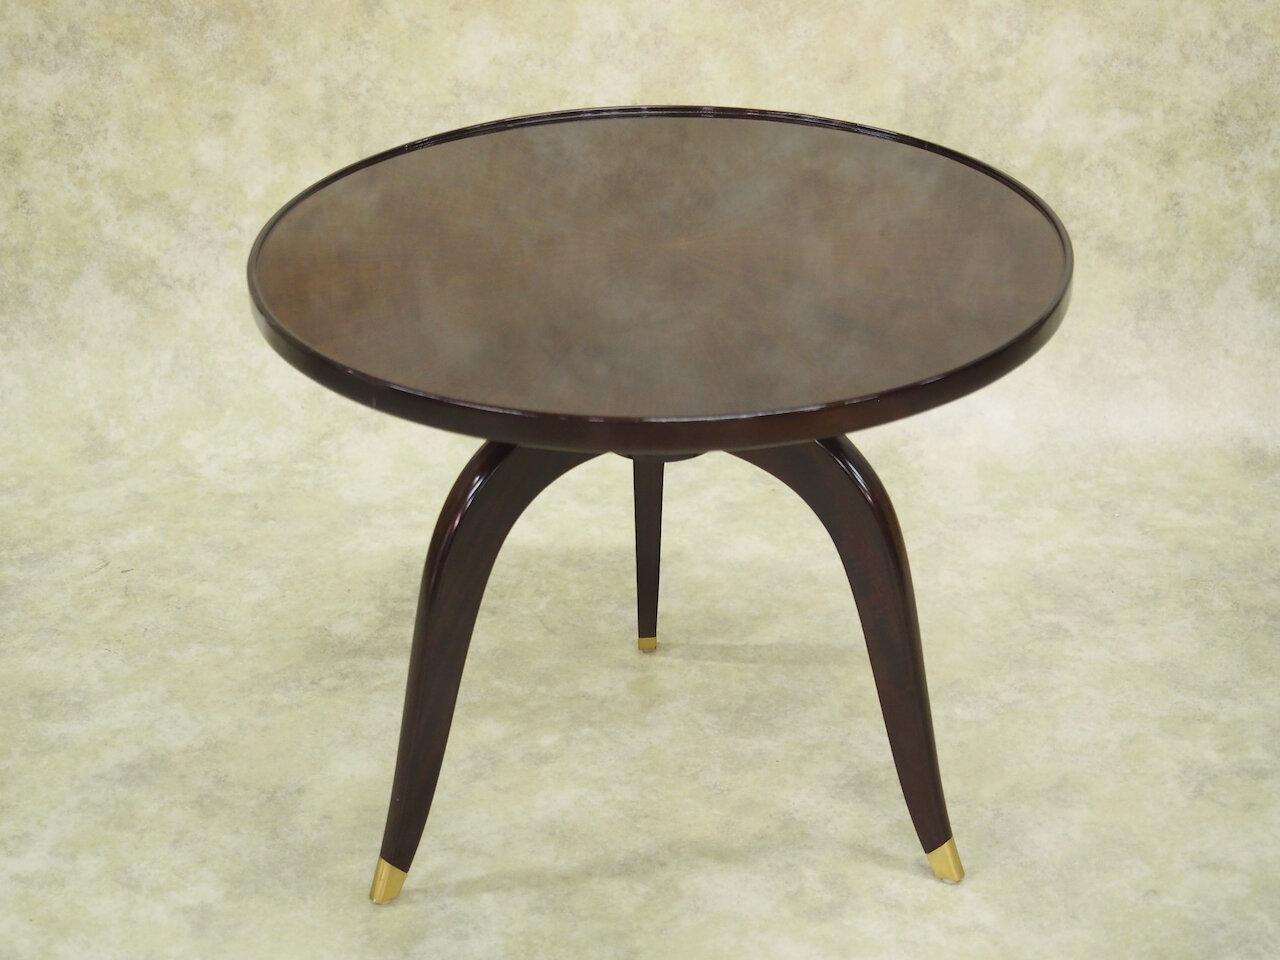 French Modernist Art Deco side table by DOMI, with macassar ebony soleil pattern top and mahogany legs with bronze mounts. Documented Mobilier & Decoration, 1934. 27.5” diameter x 22” high. Restored and refinished. 

Model used in the residence of